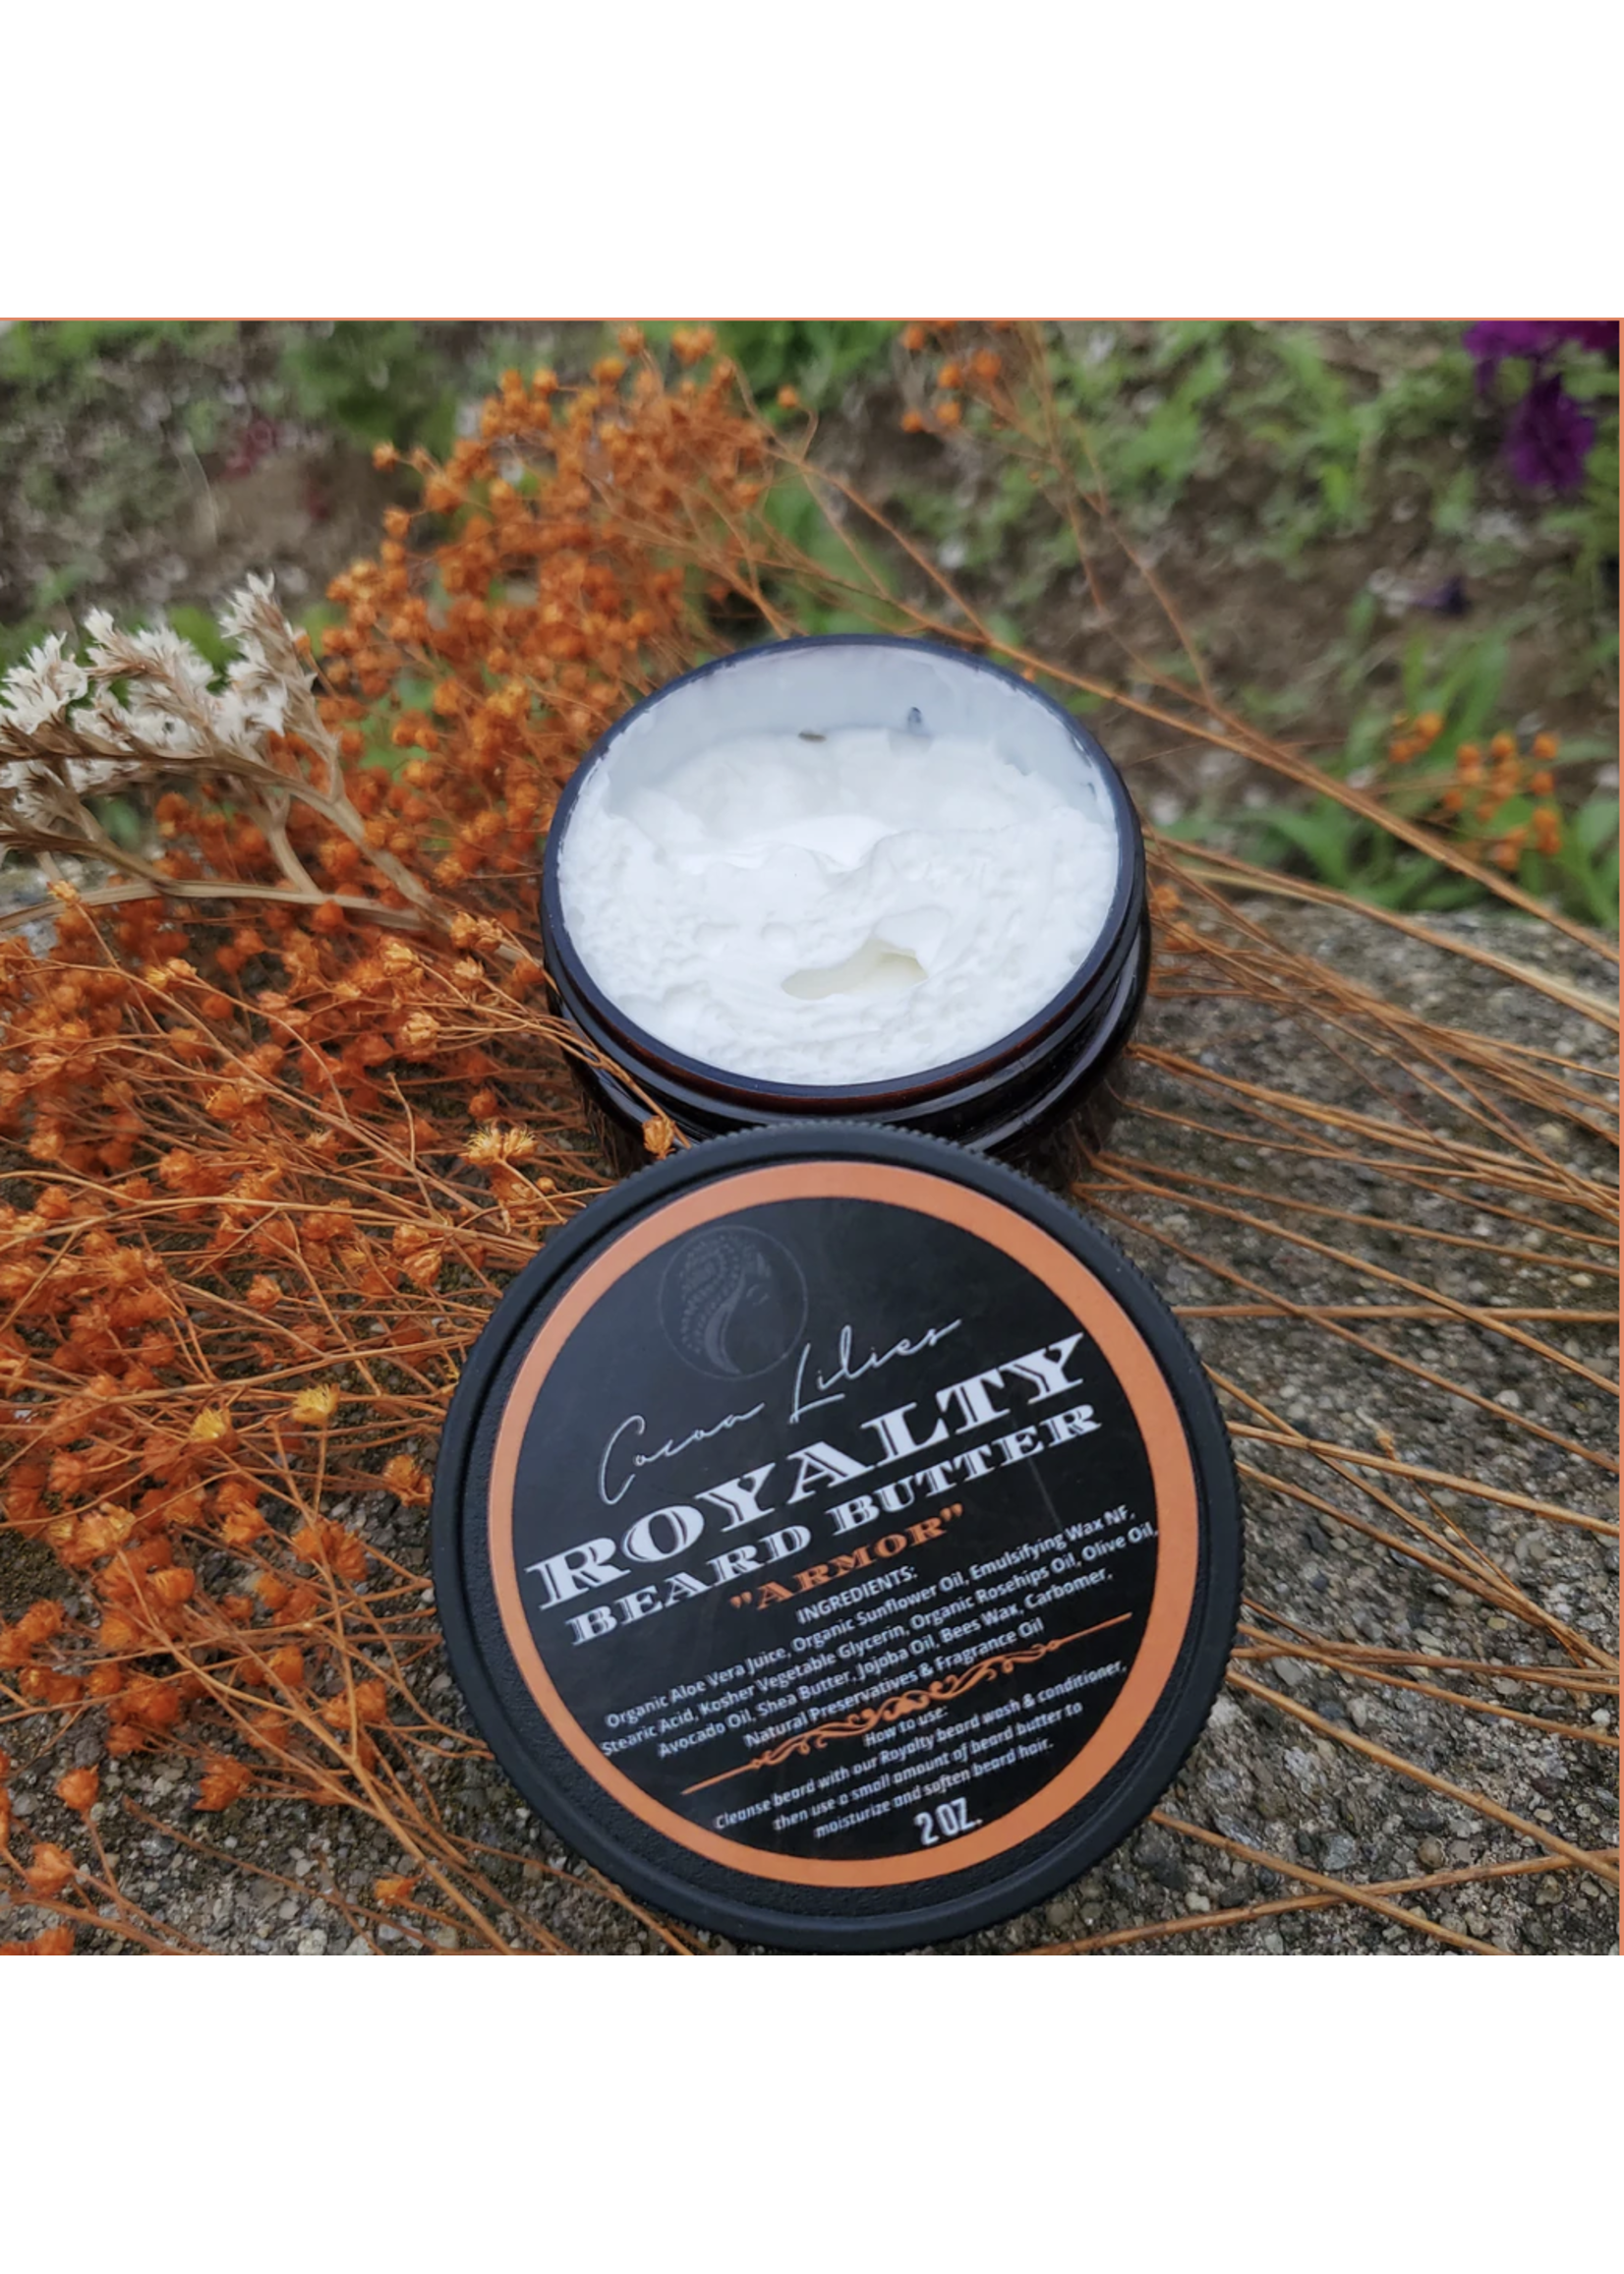 Cocoa Lilies Royalty Beard Butter "Amour"